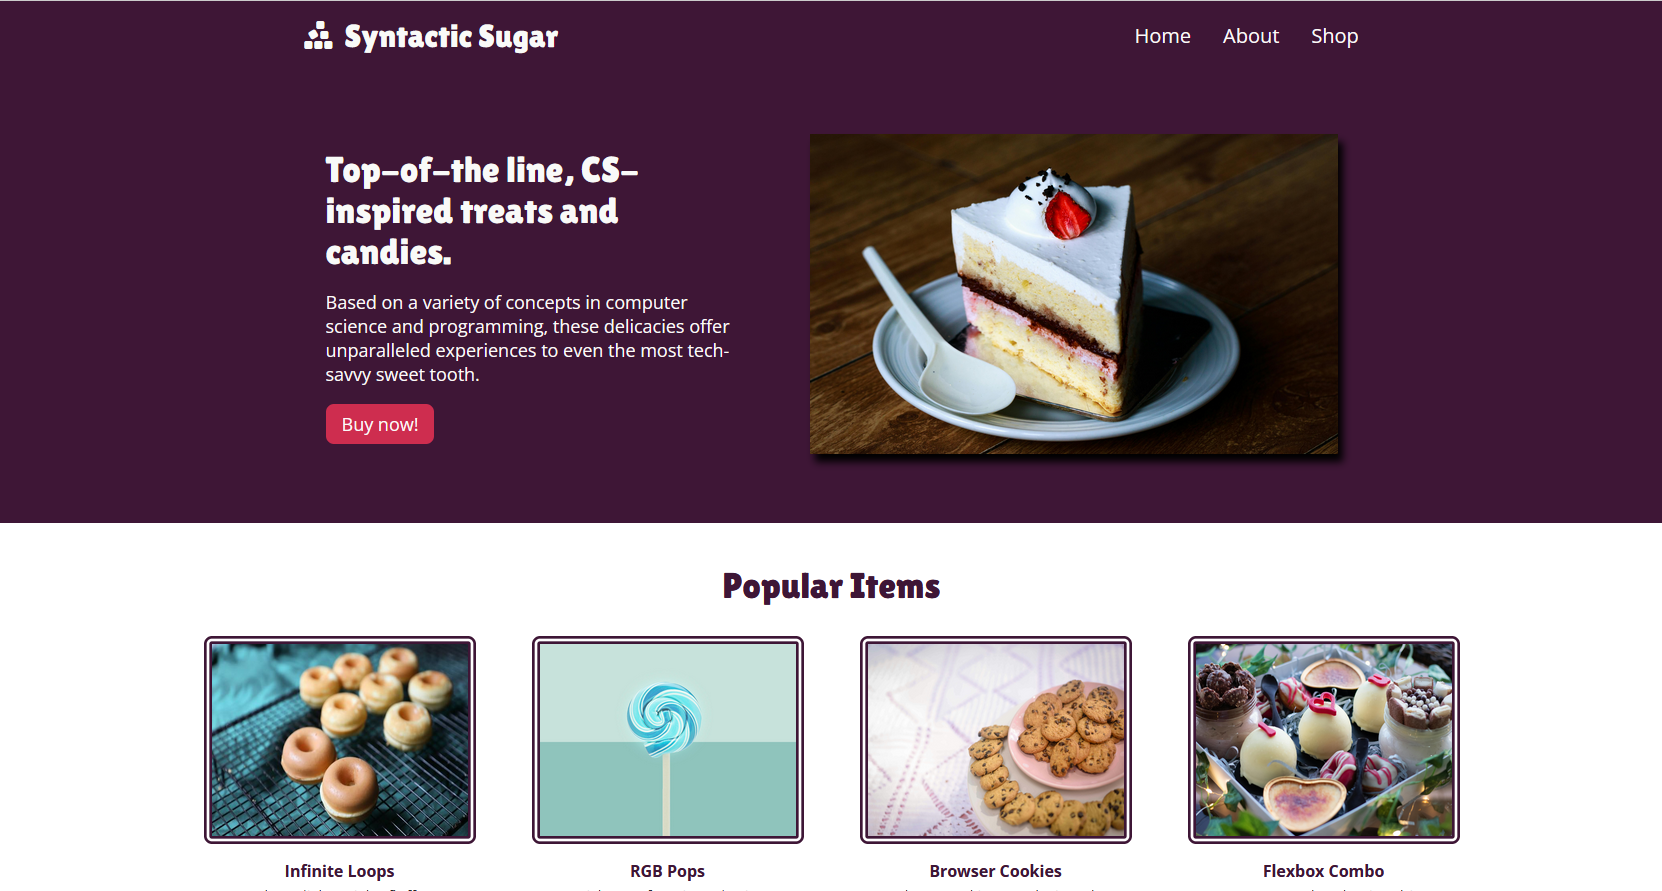 Preview image for the Syntactic Sugar landing page, featuring a prominent banner and an image of cake